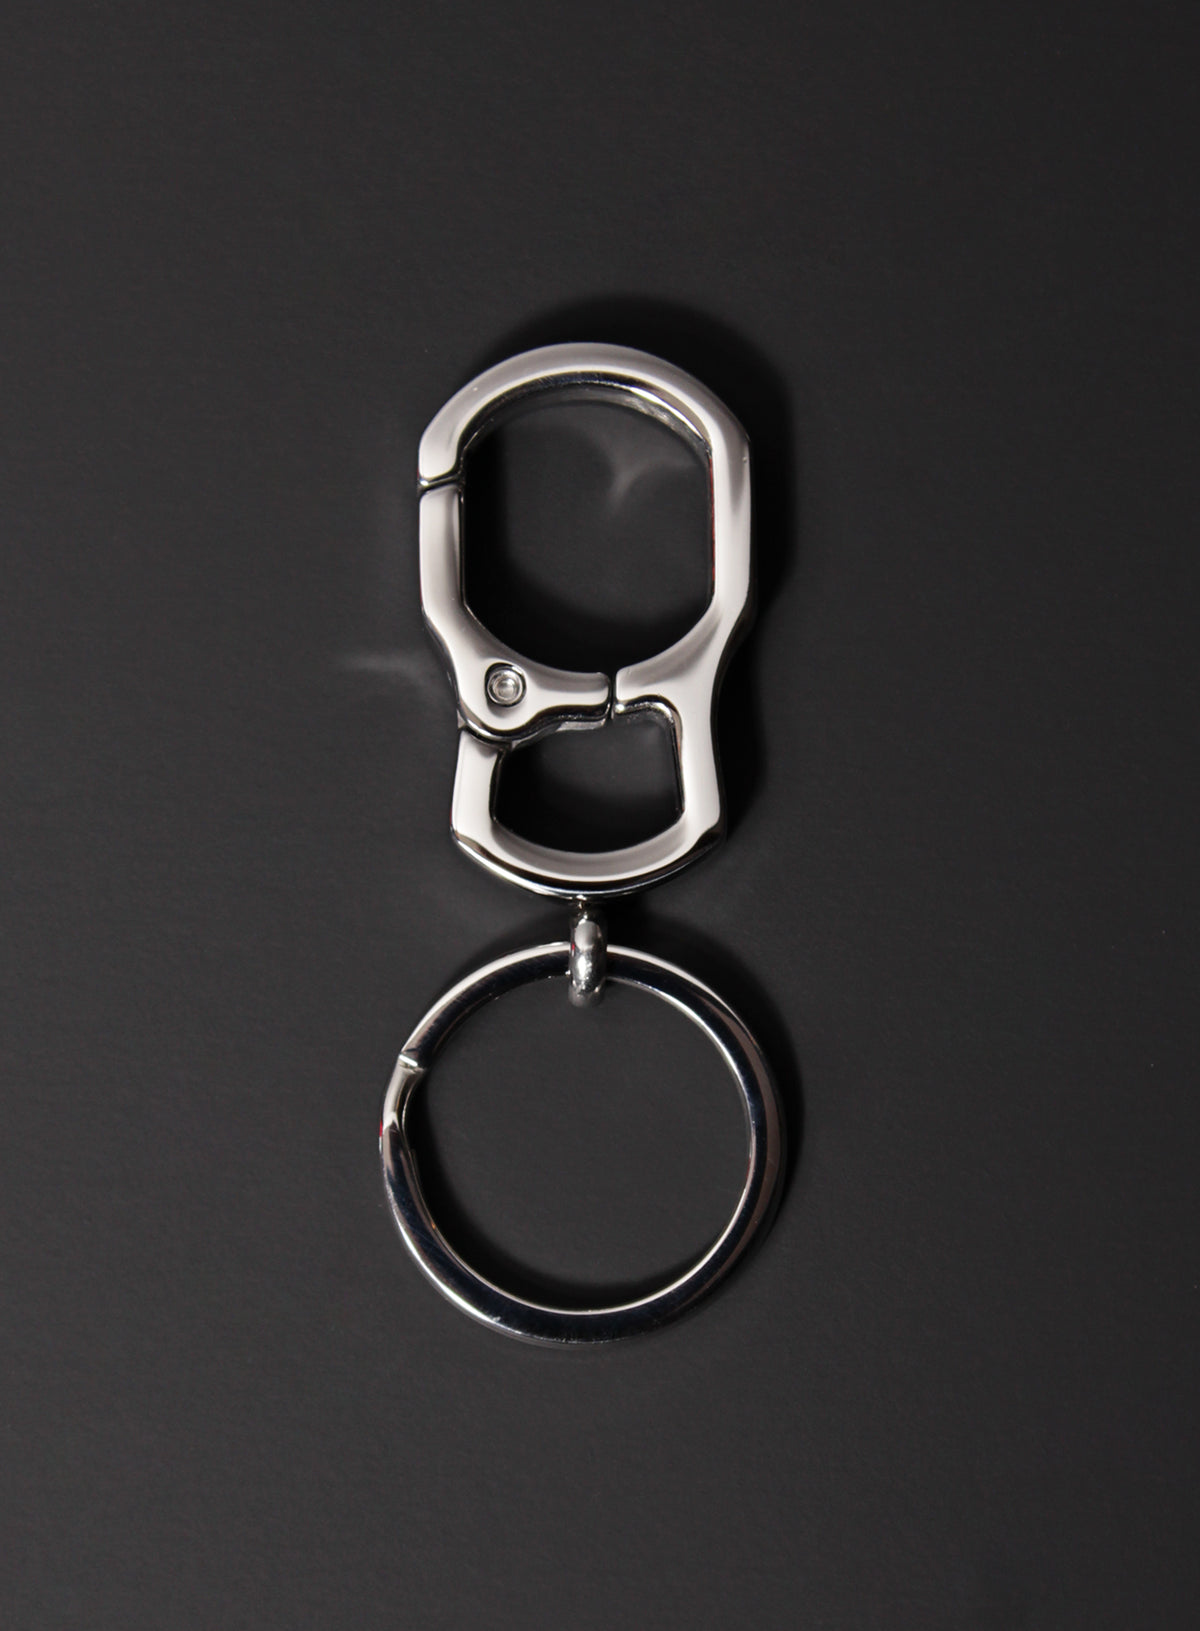 Outdoor Stainless Steel Carabiner Key Chain Clip Hook Buckle Keychain Key  Ring